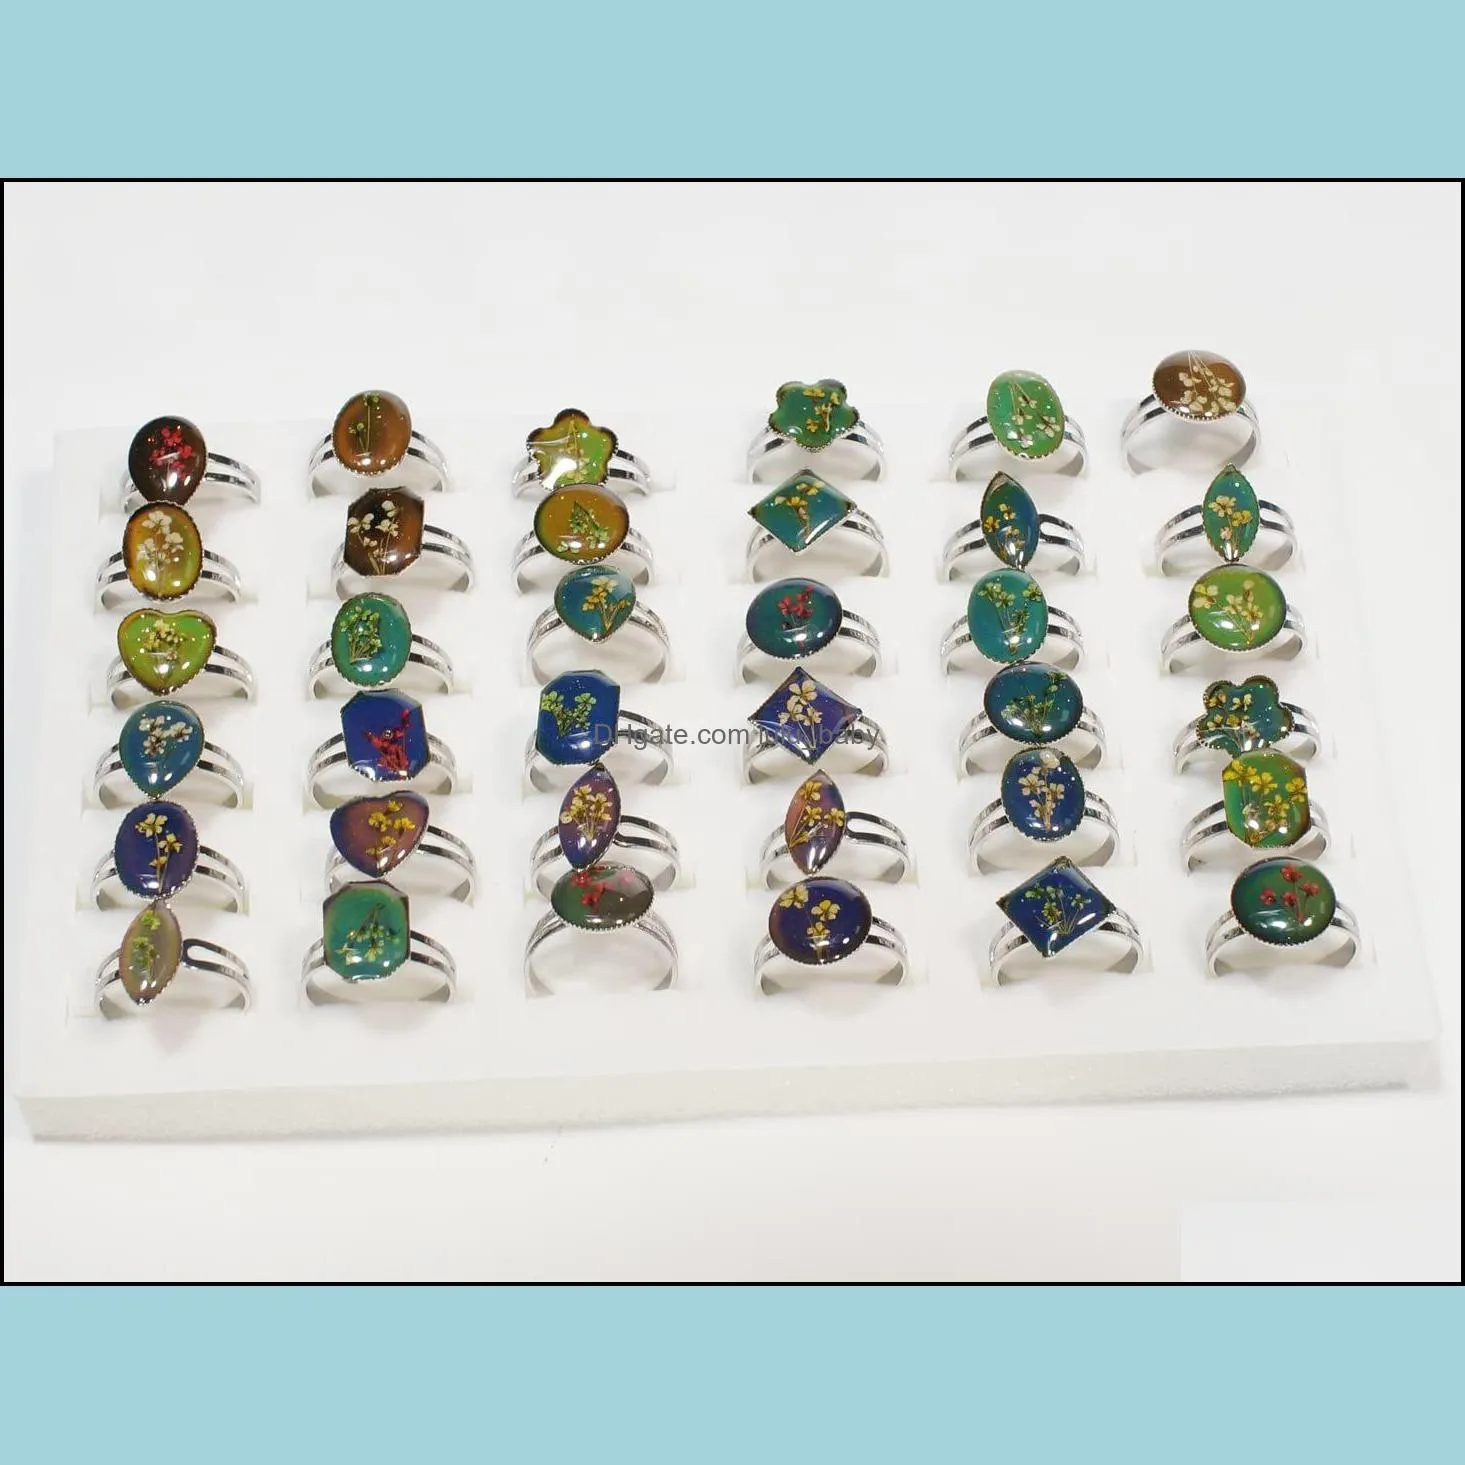 Band Plant Dried Flower Cut Mood Rings 36 Pieces/Lot with Jewelry Box Bulk Crystal Jewelry Wholesale